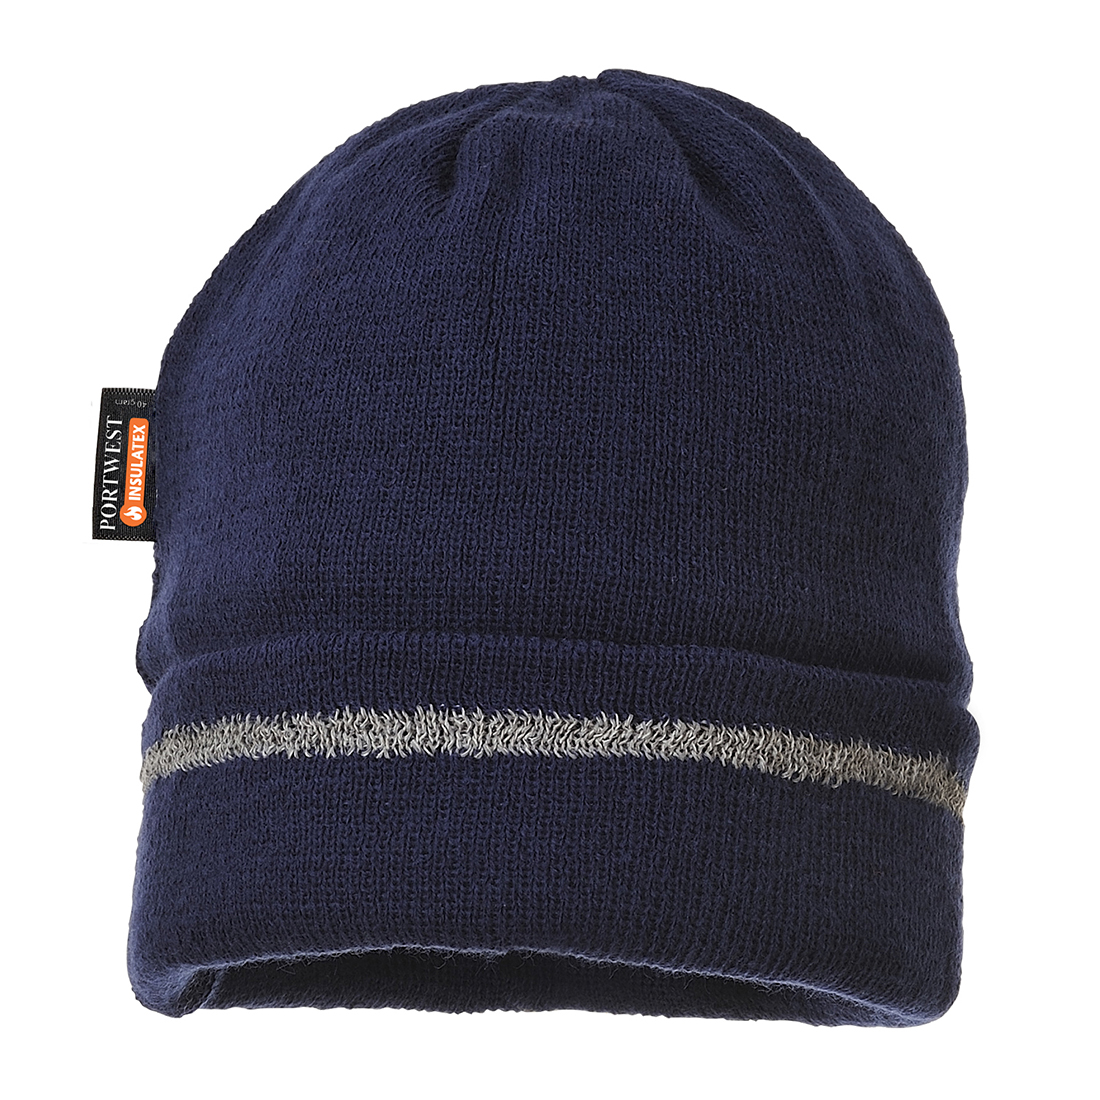 Reflective Trim Knit Hat Insulatex Lined Size  Navy